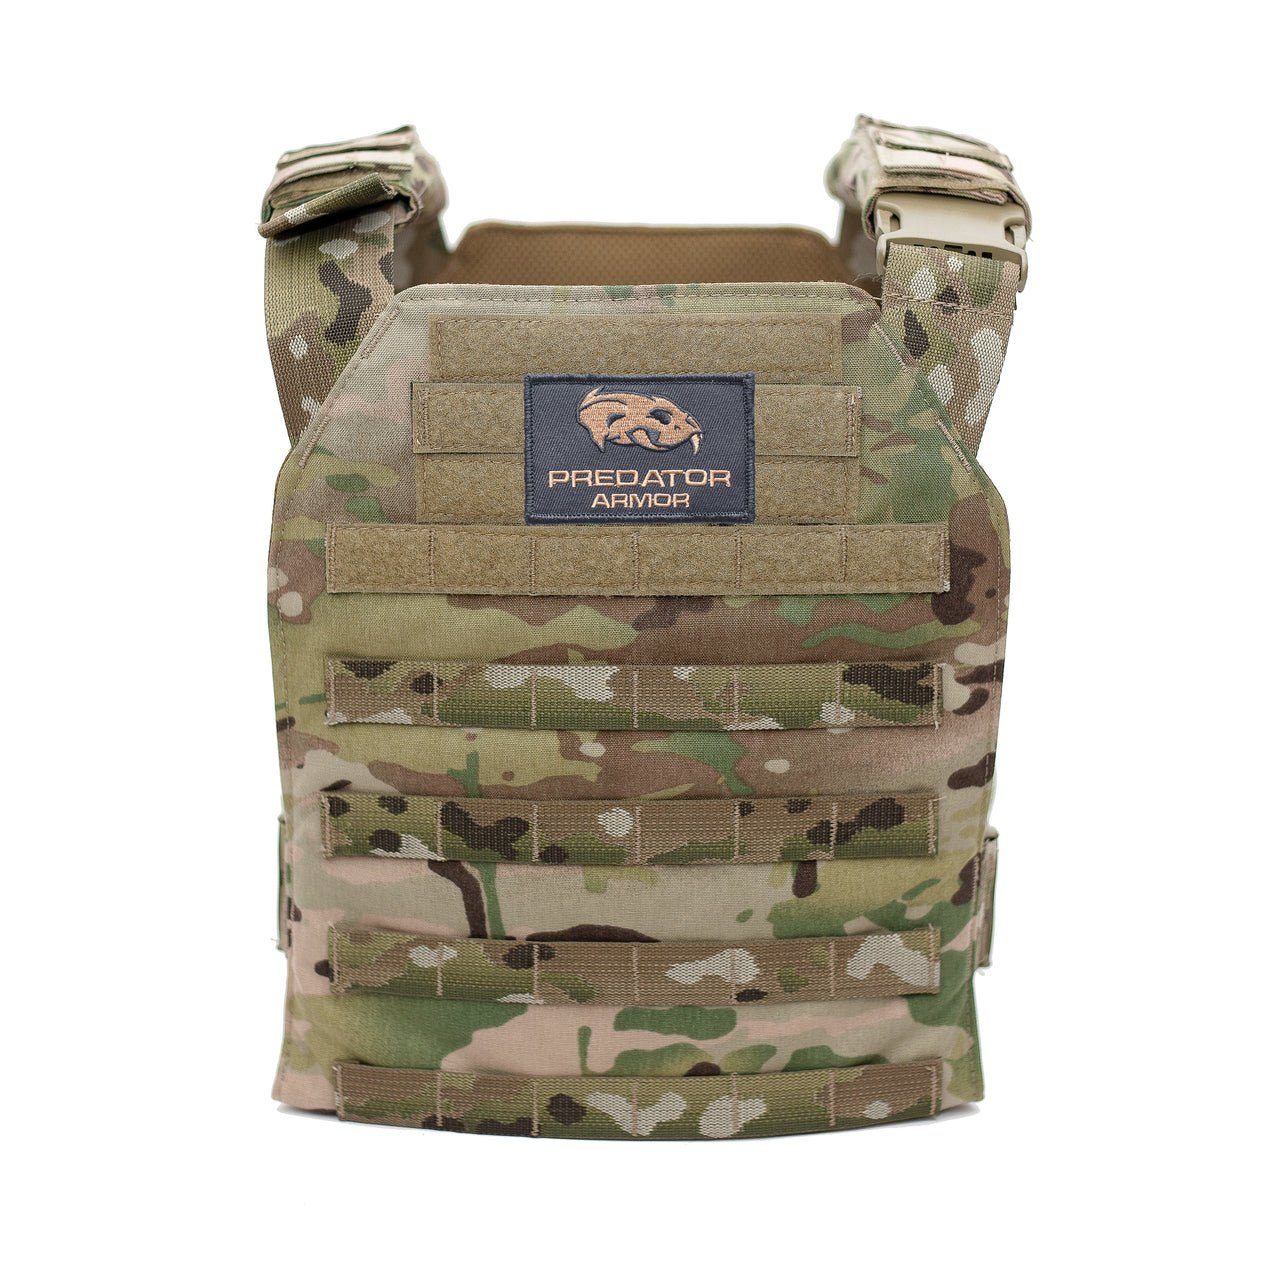 The Predator Armor Minuteman Plate Carrier is shown on a white background.